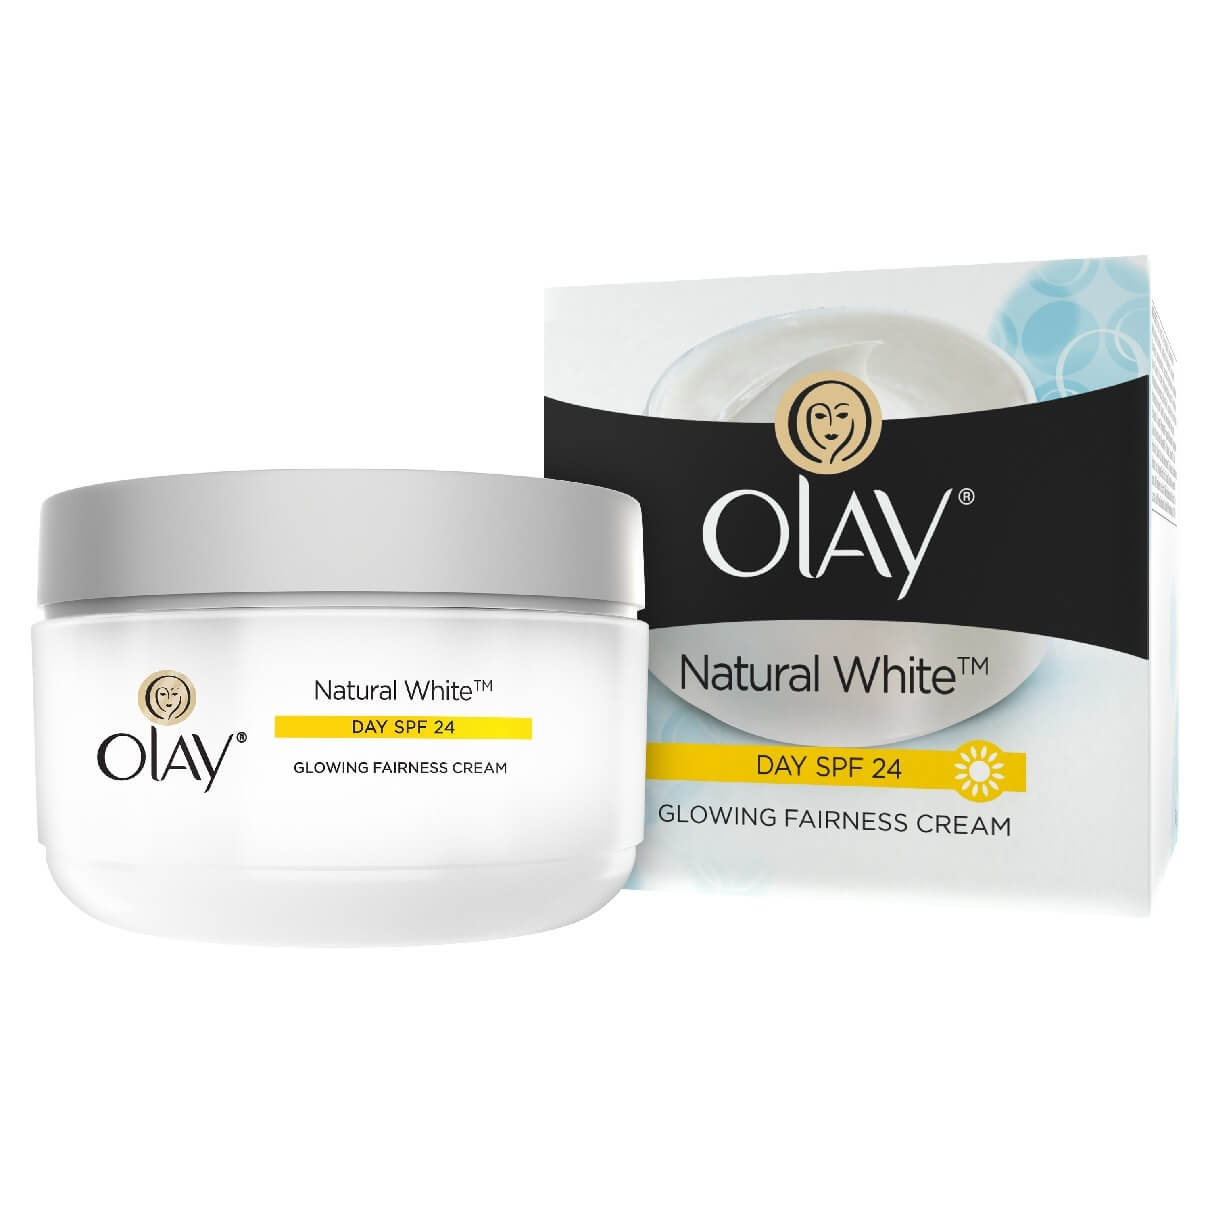 Olay natural white Fairness Cream Brands in The World